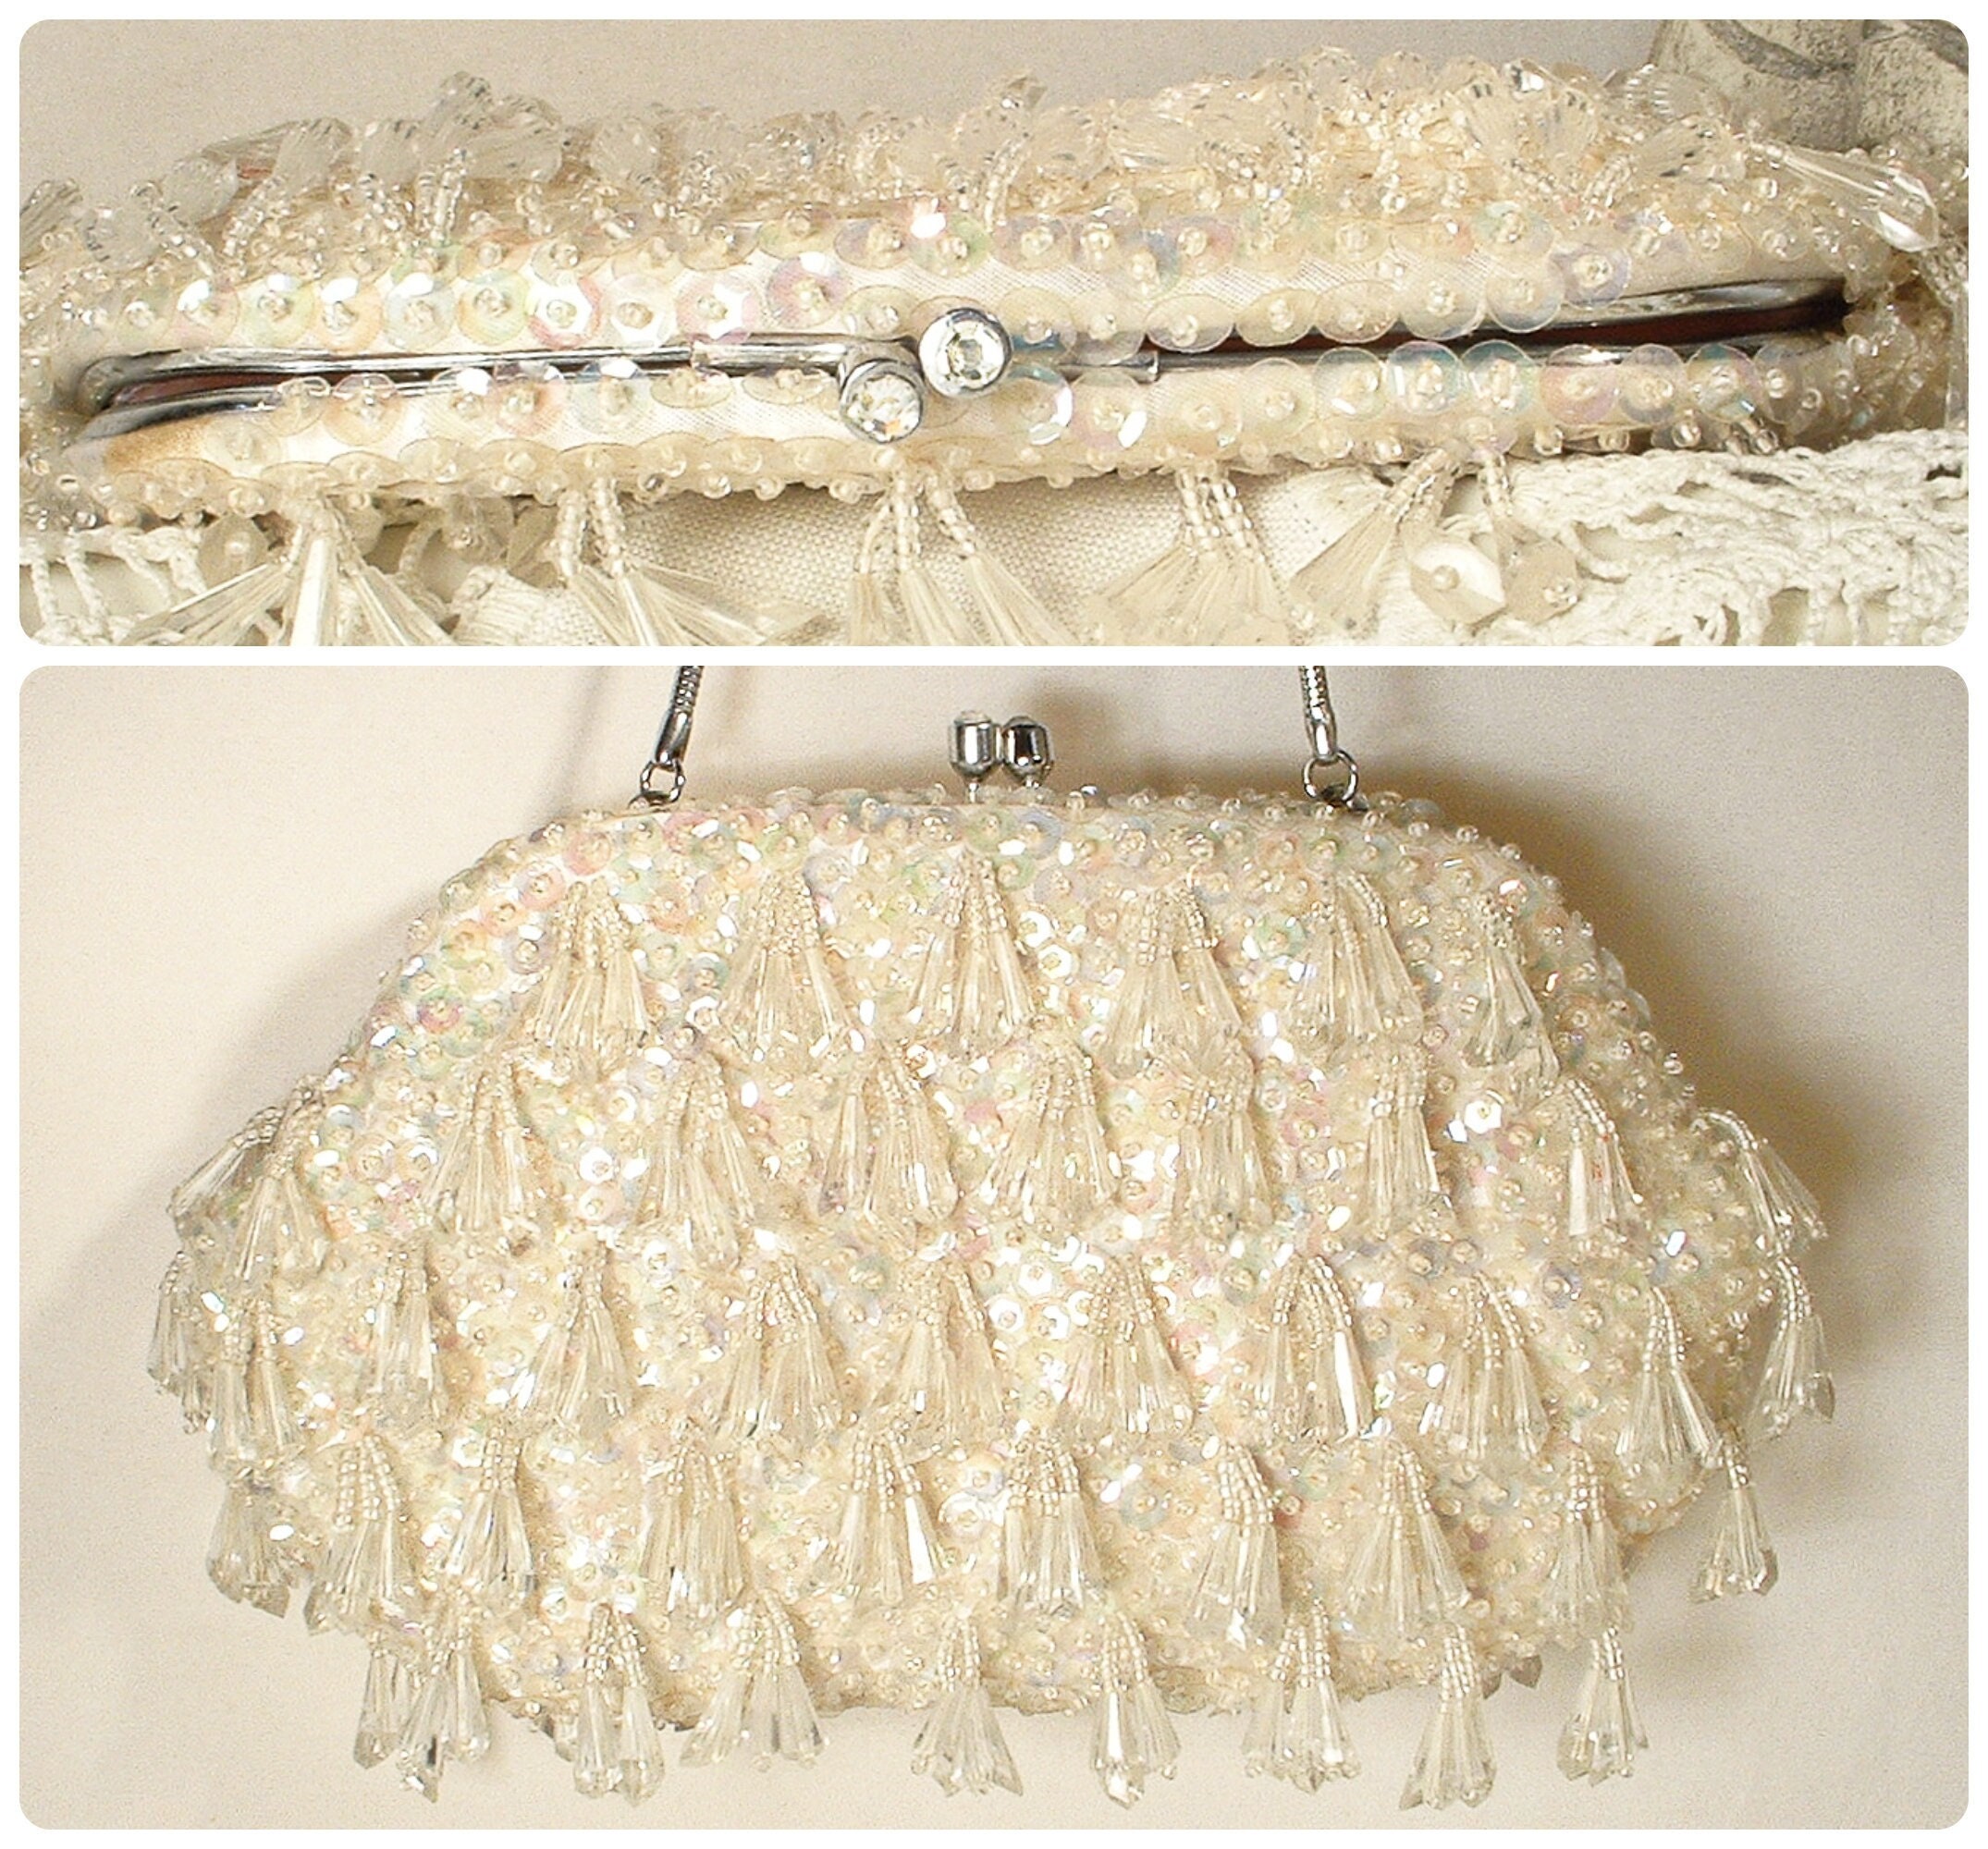 Vintage 1950s Beaded Evening Bag with Diamante Clasp France